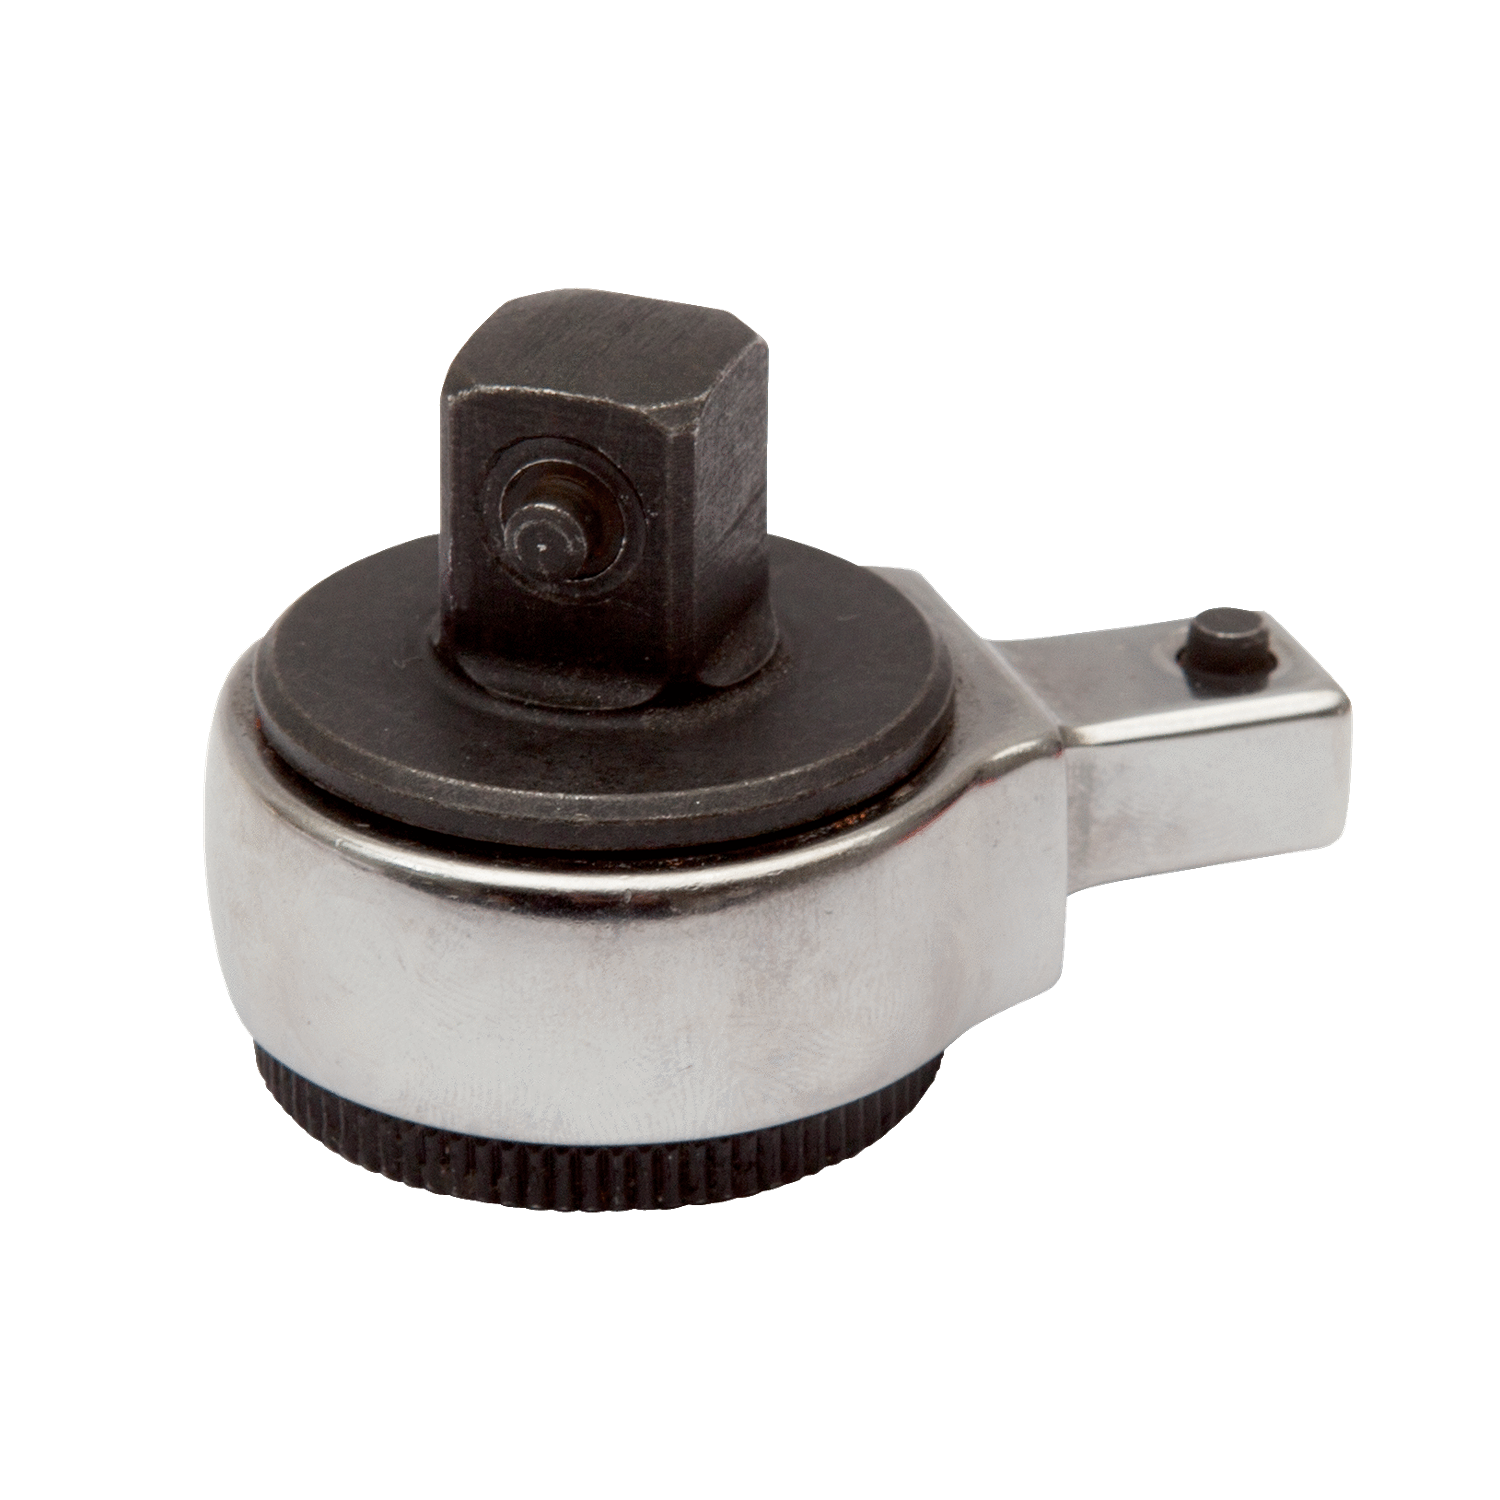 BAHCO TAH7852-1 Reversible Ratchet Head Locking Mechanism 14x18mm - Premium Ratchet Head from BAHCO - Shop now at Yew Aik.